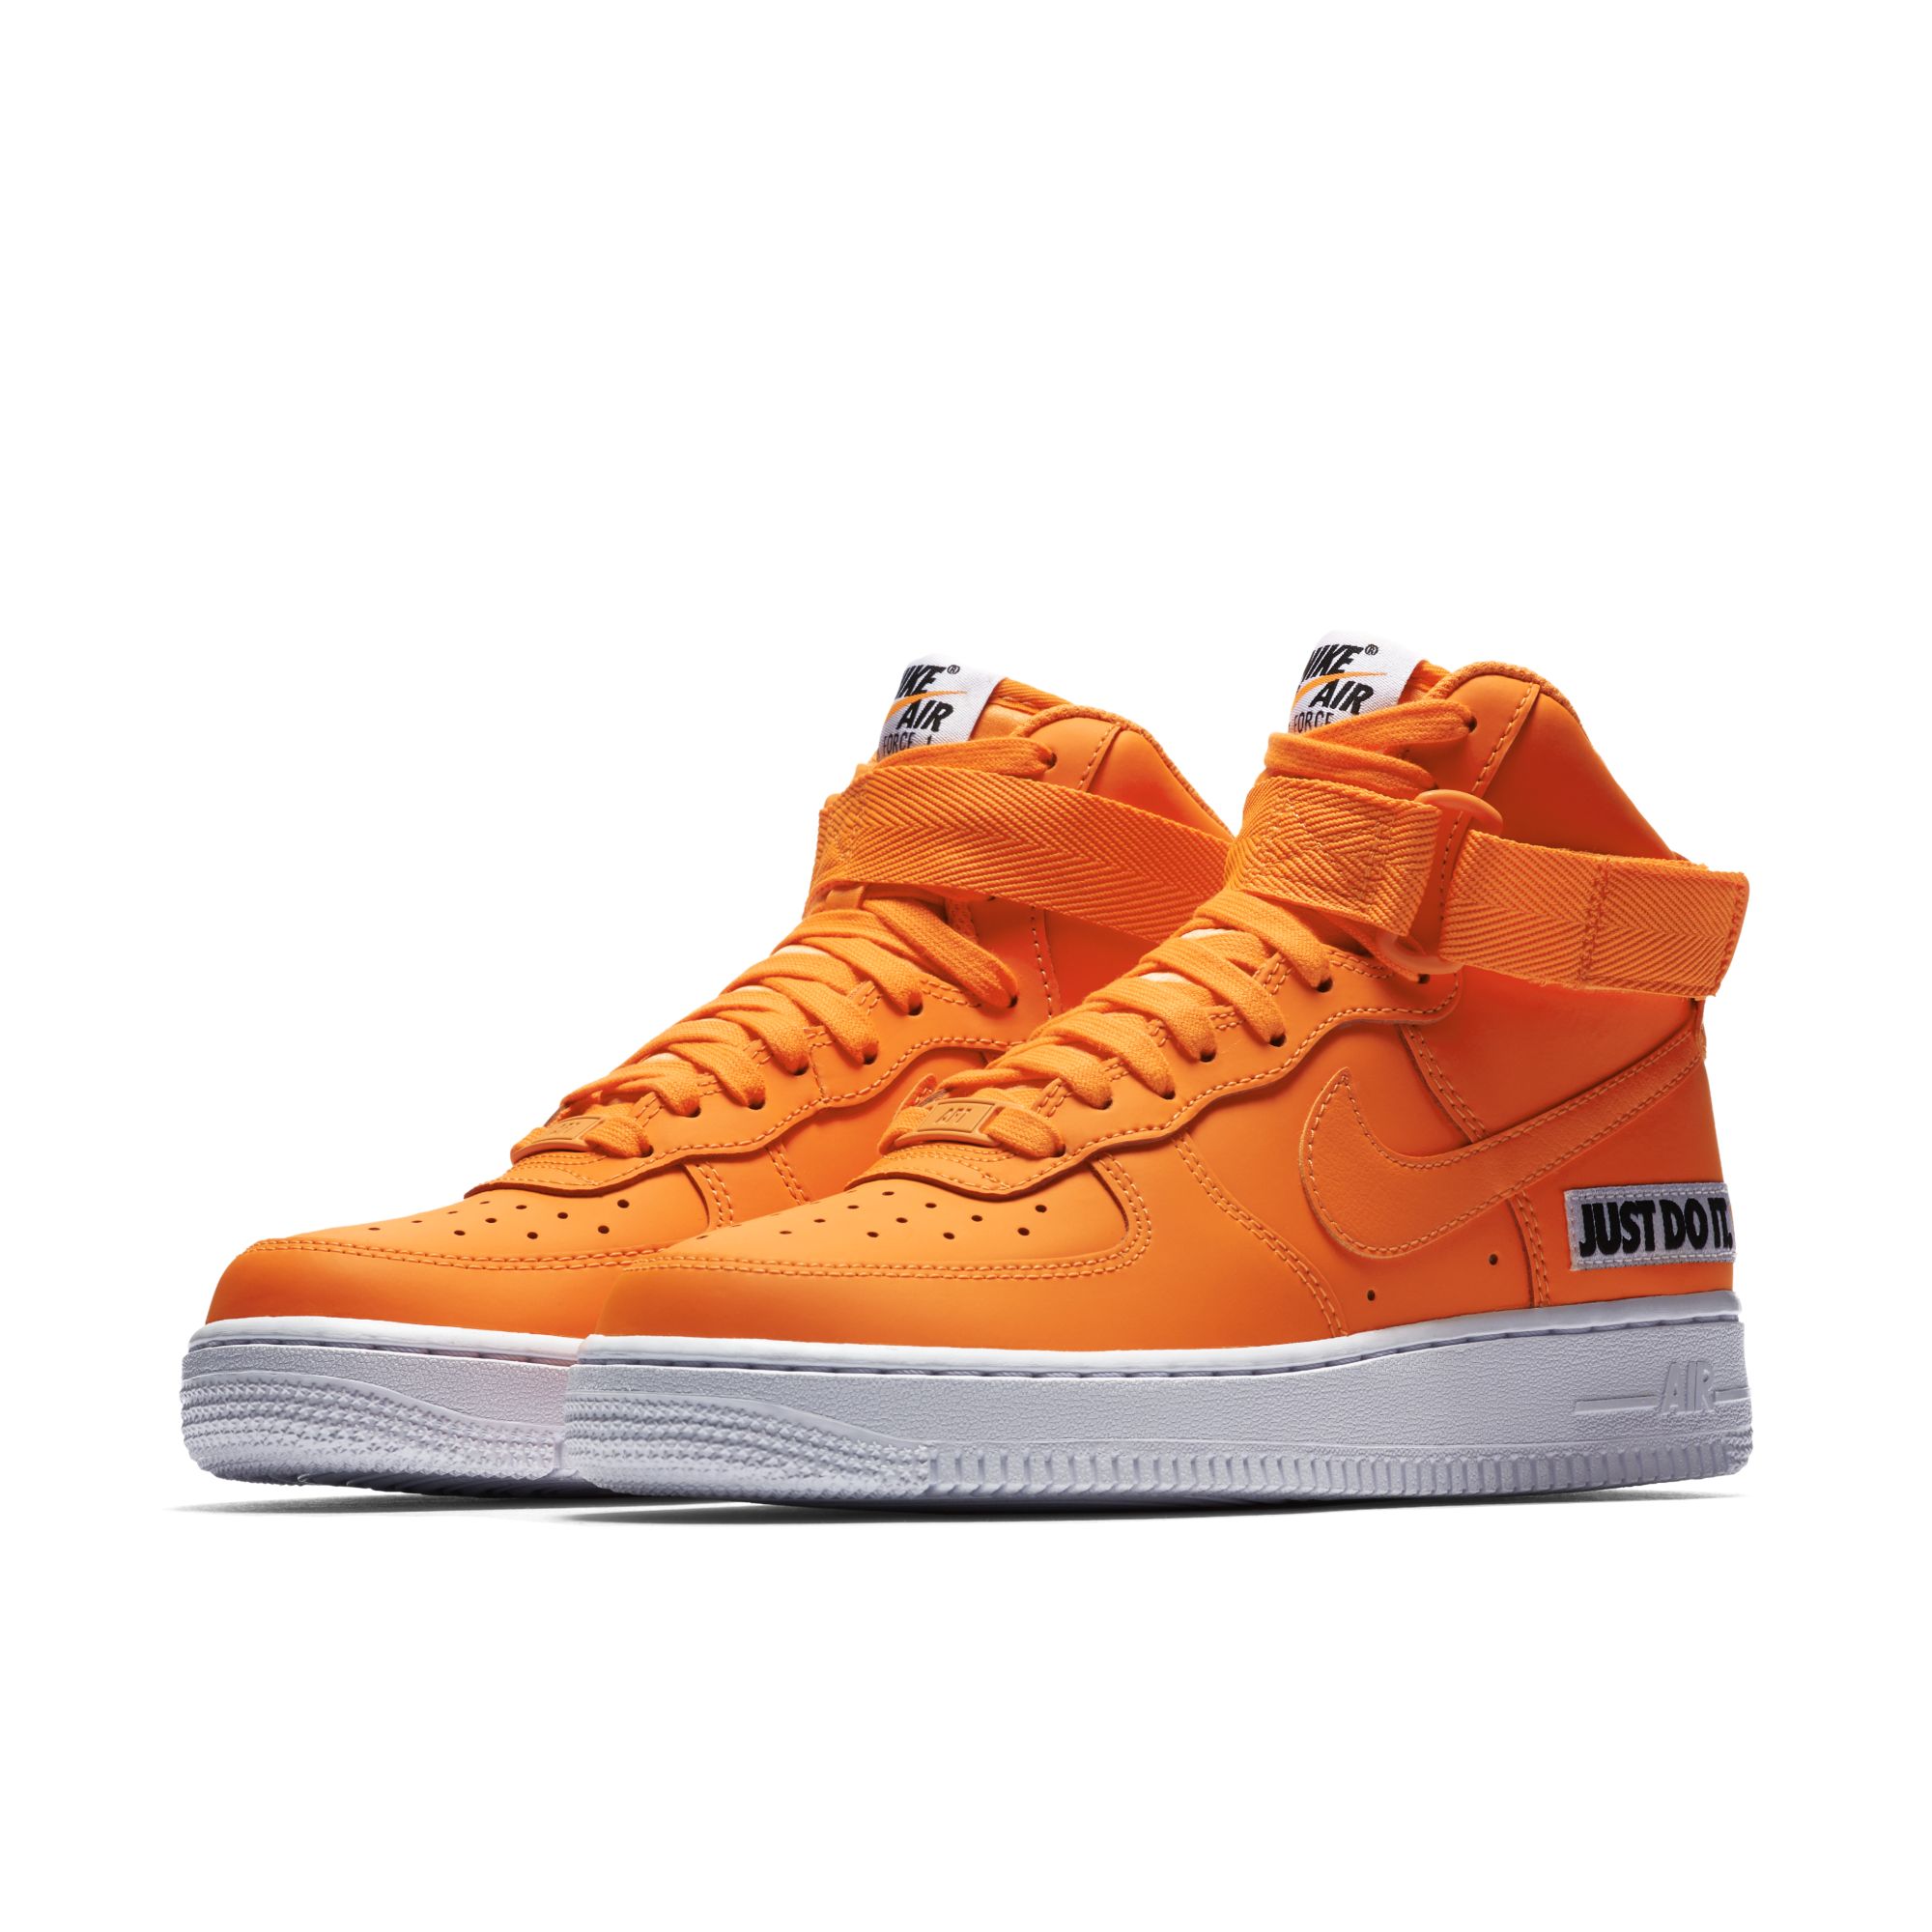 NIKE WMNS AIR FORCE 1 HIGH LX LEATHER TOTAL ORANGE WHITE 1